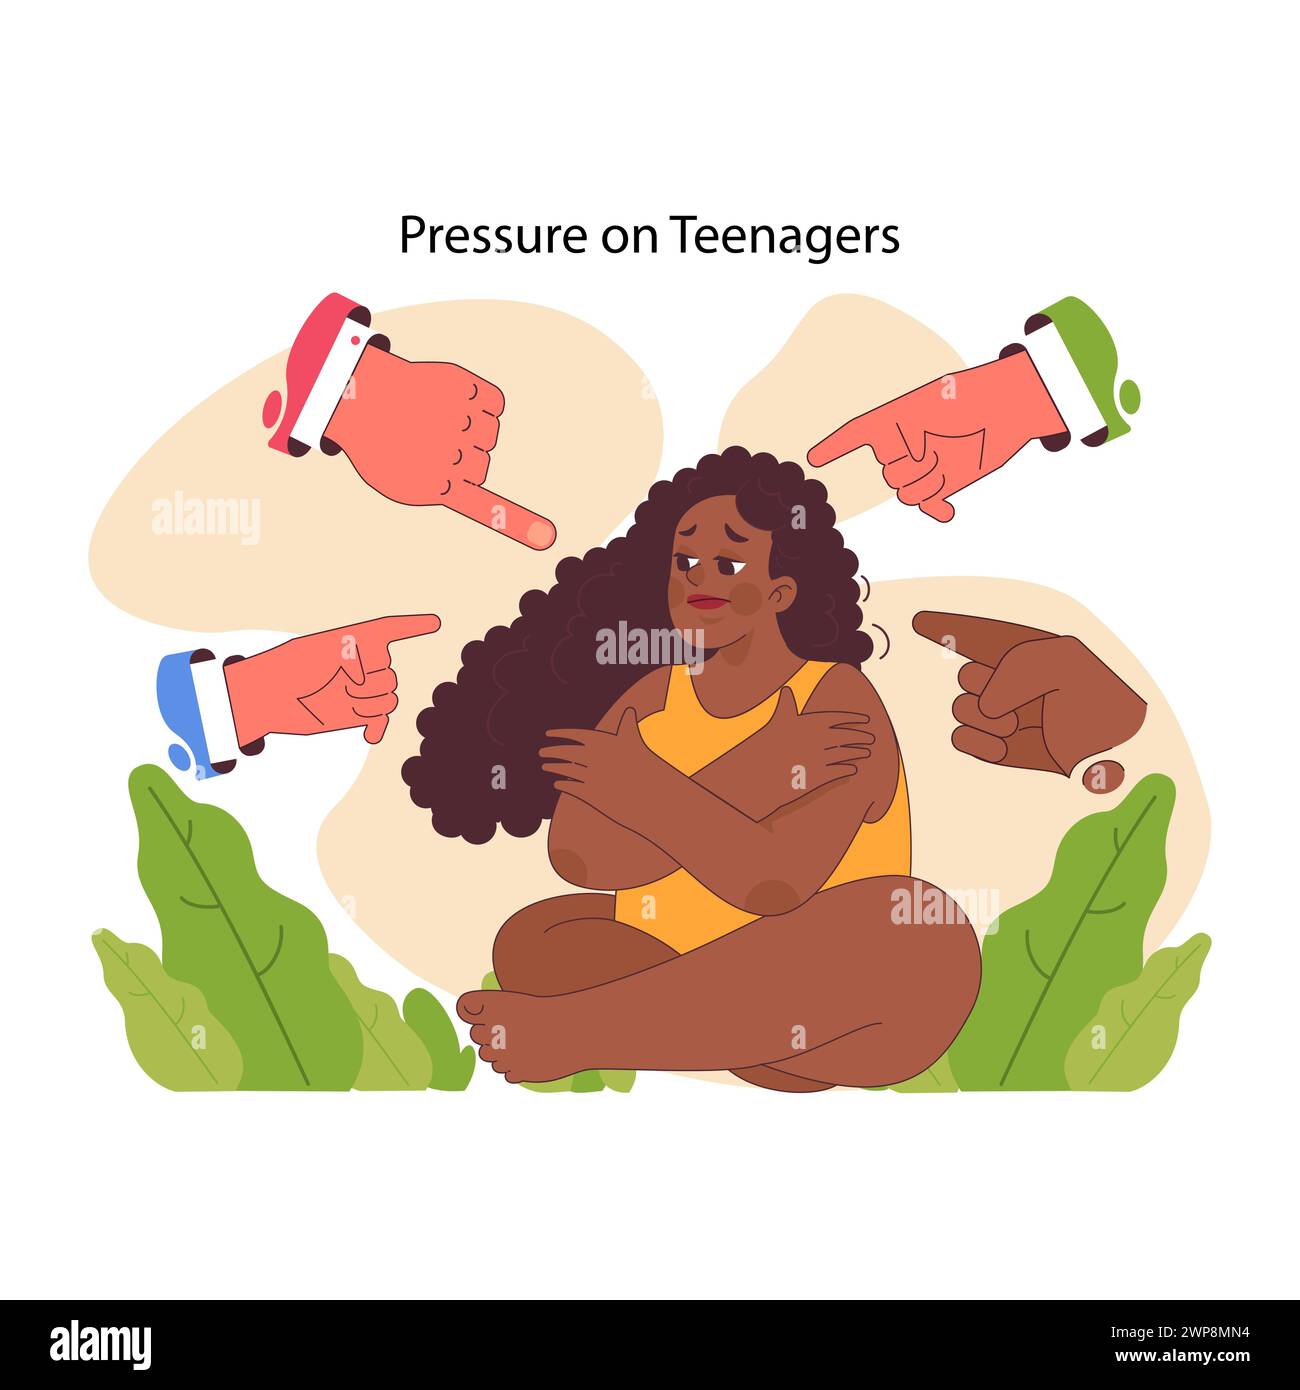 Teenage pressure concept. Distressed young girl surrounded by pointing fingers, depicting societal judgement. Emotional challenges, discrimination faced during adolescence. Flat vector illustration Stock Vector